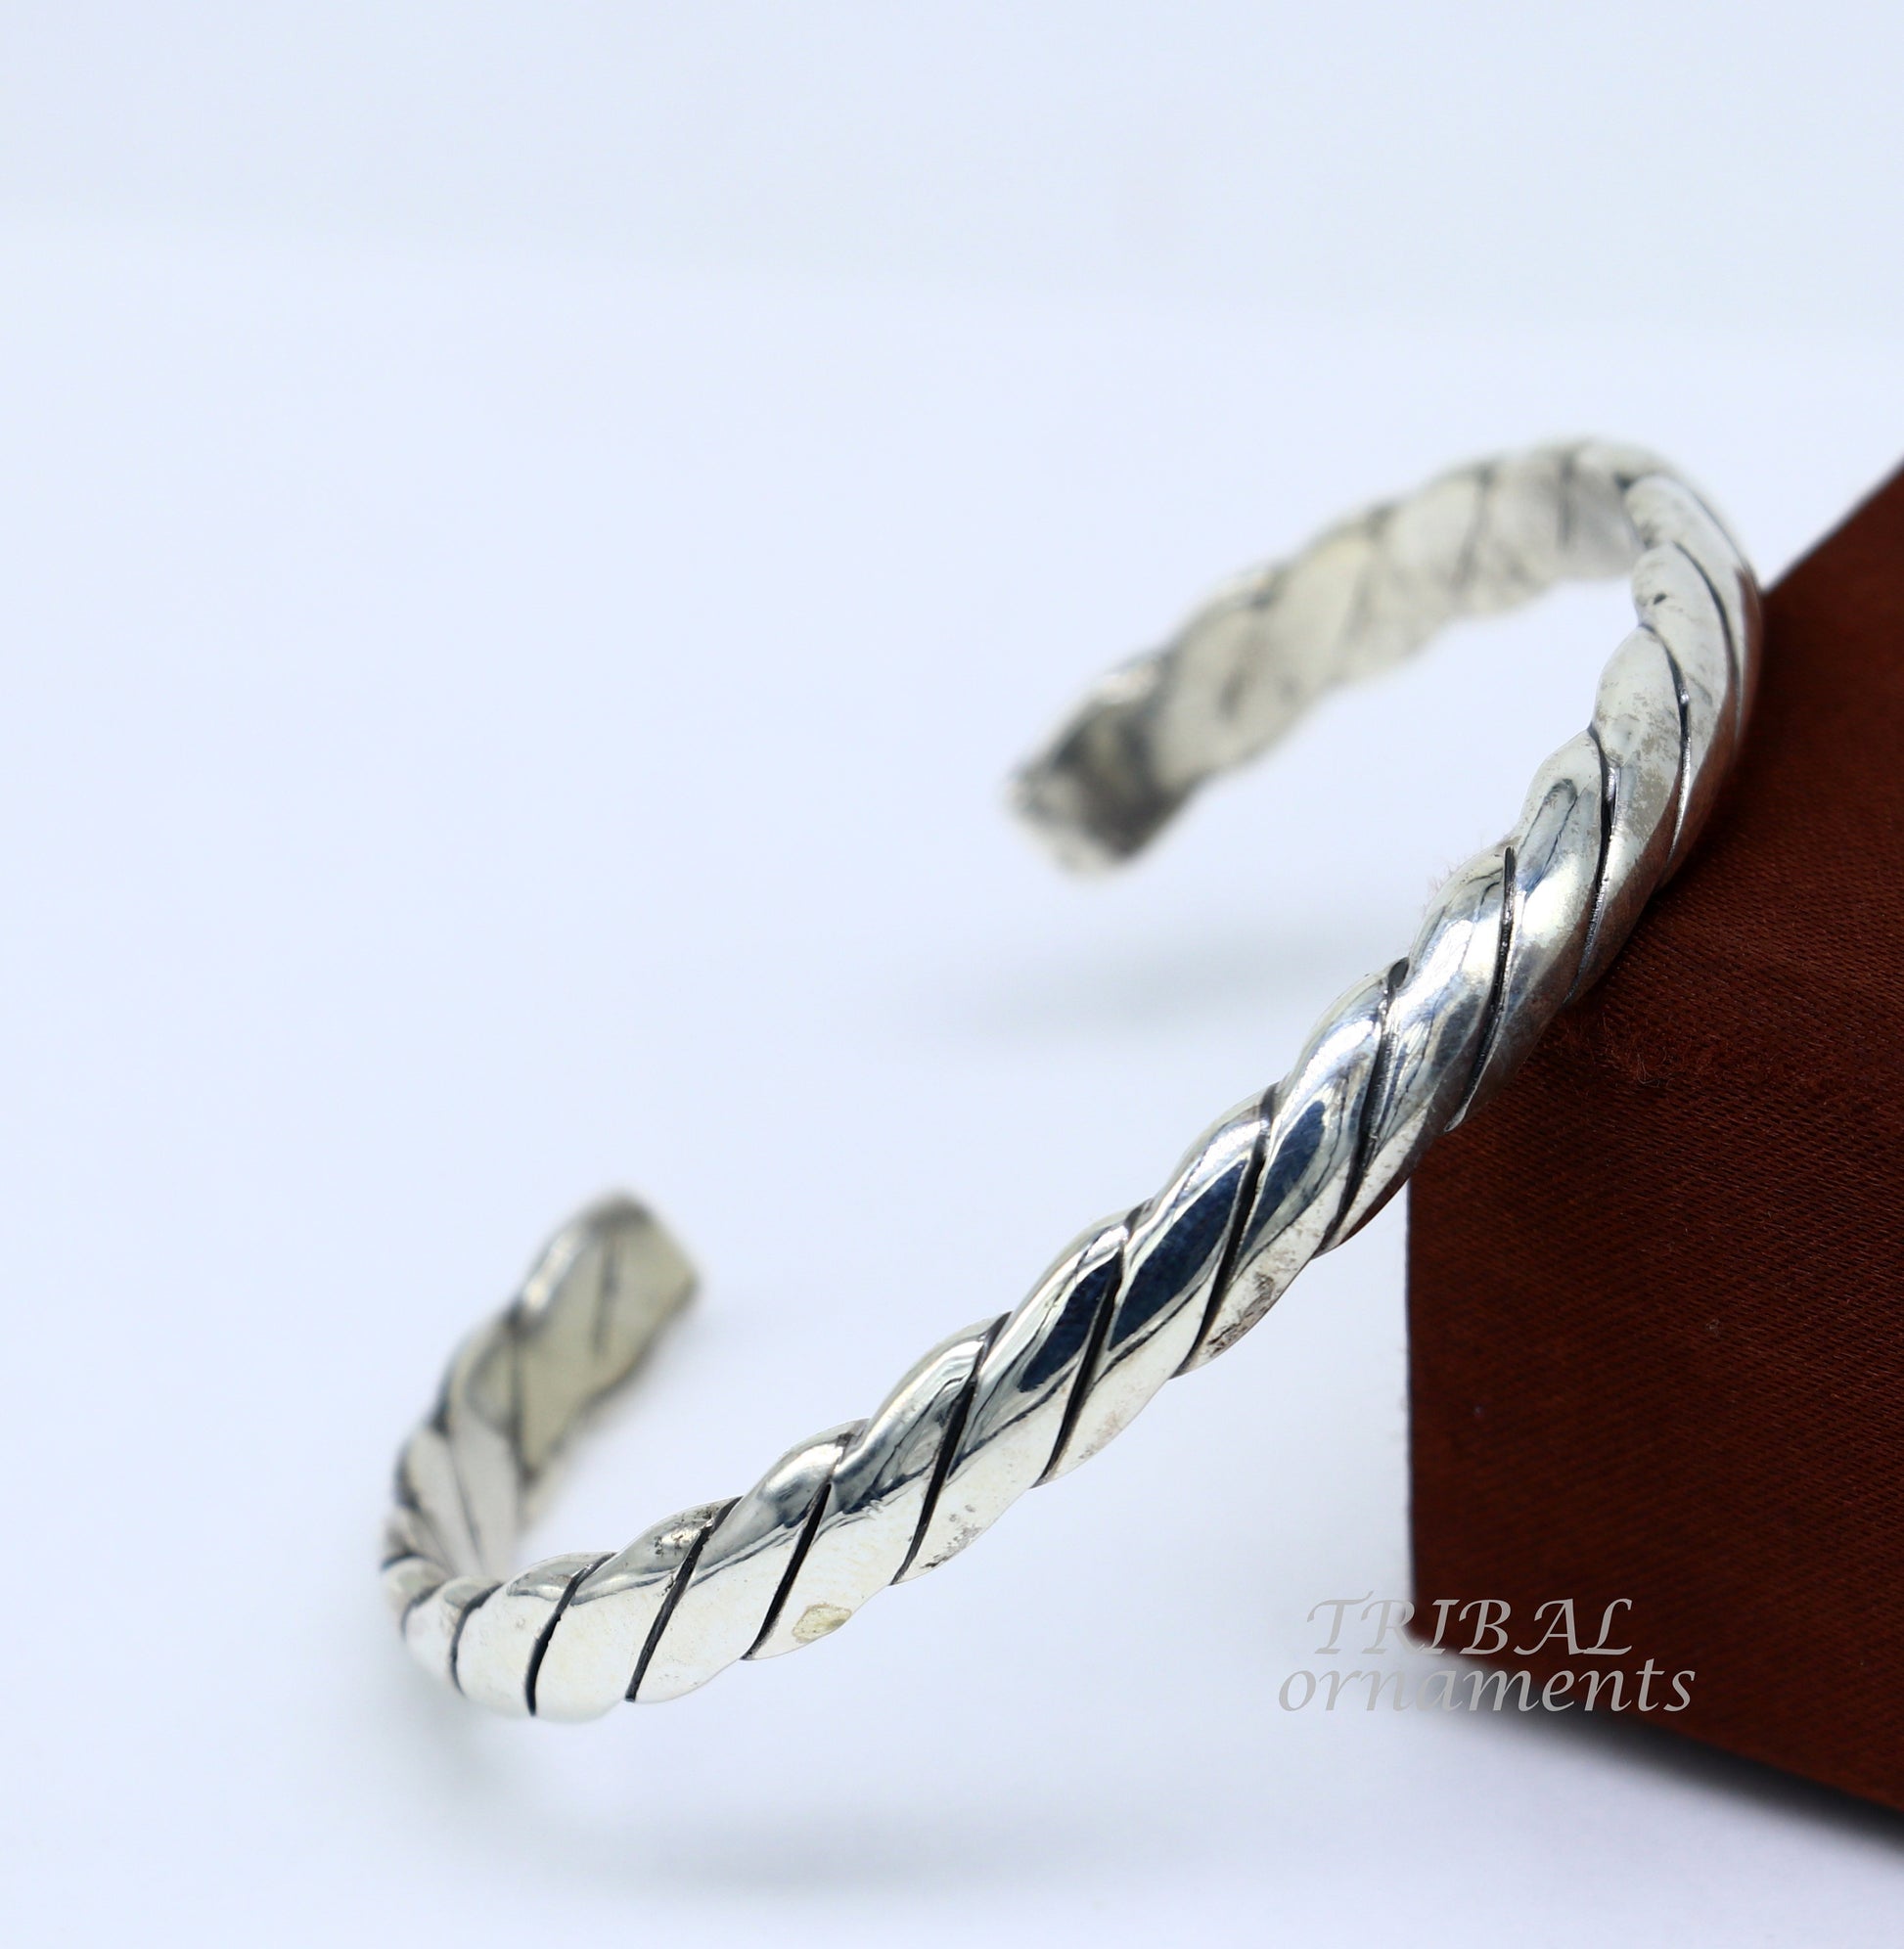 925 sterling silver handmade unique design fabulous open face adjustable bangle cuff bracelet kada, excellent gifting jewelry her cuff116 - TRIBAL ORNAMENTS